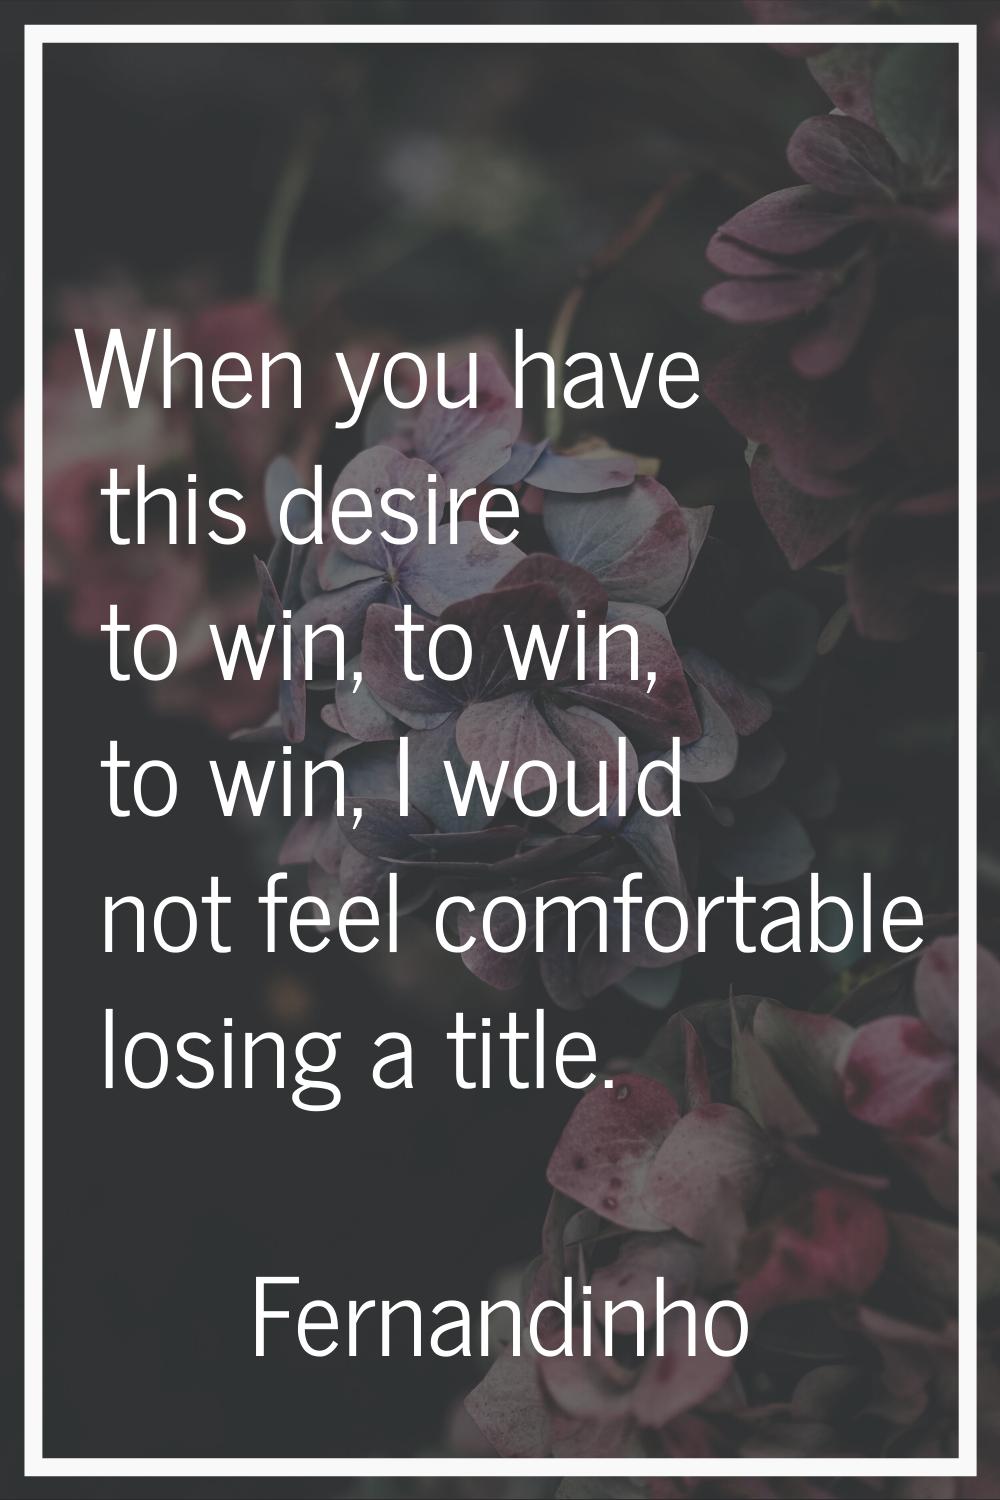 When you have this desire to win, to win, to win, I would not feel comfortable losing a title.